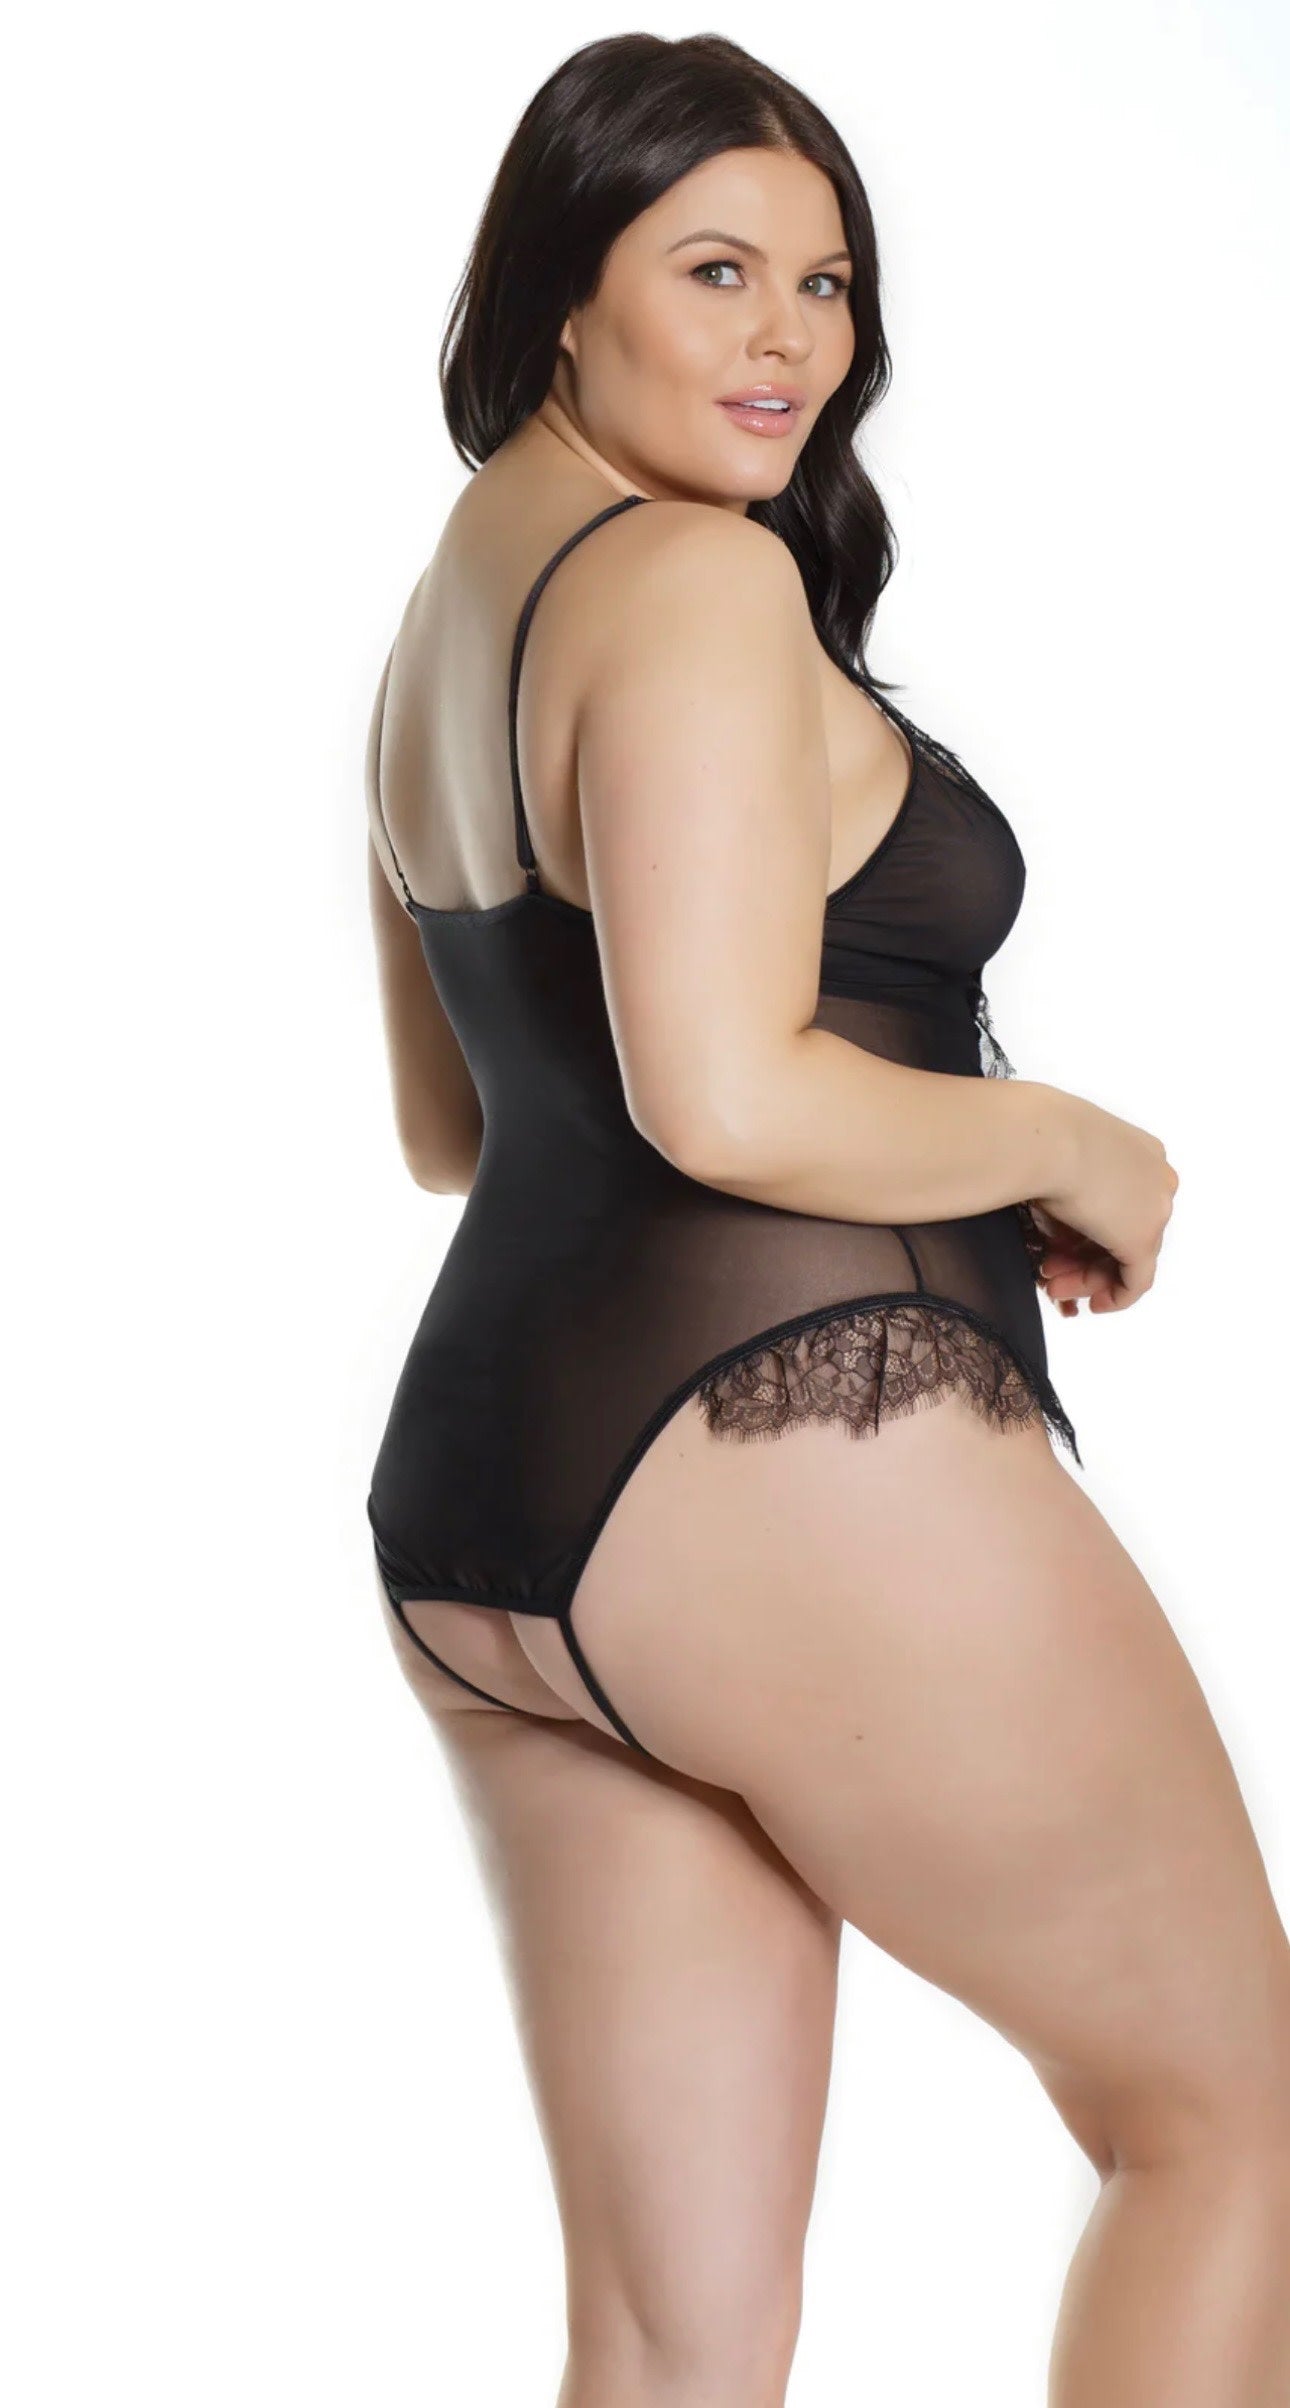 Coquette Sheer Crotchless Teddy W/ Eyelash Lace